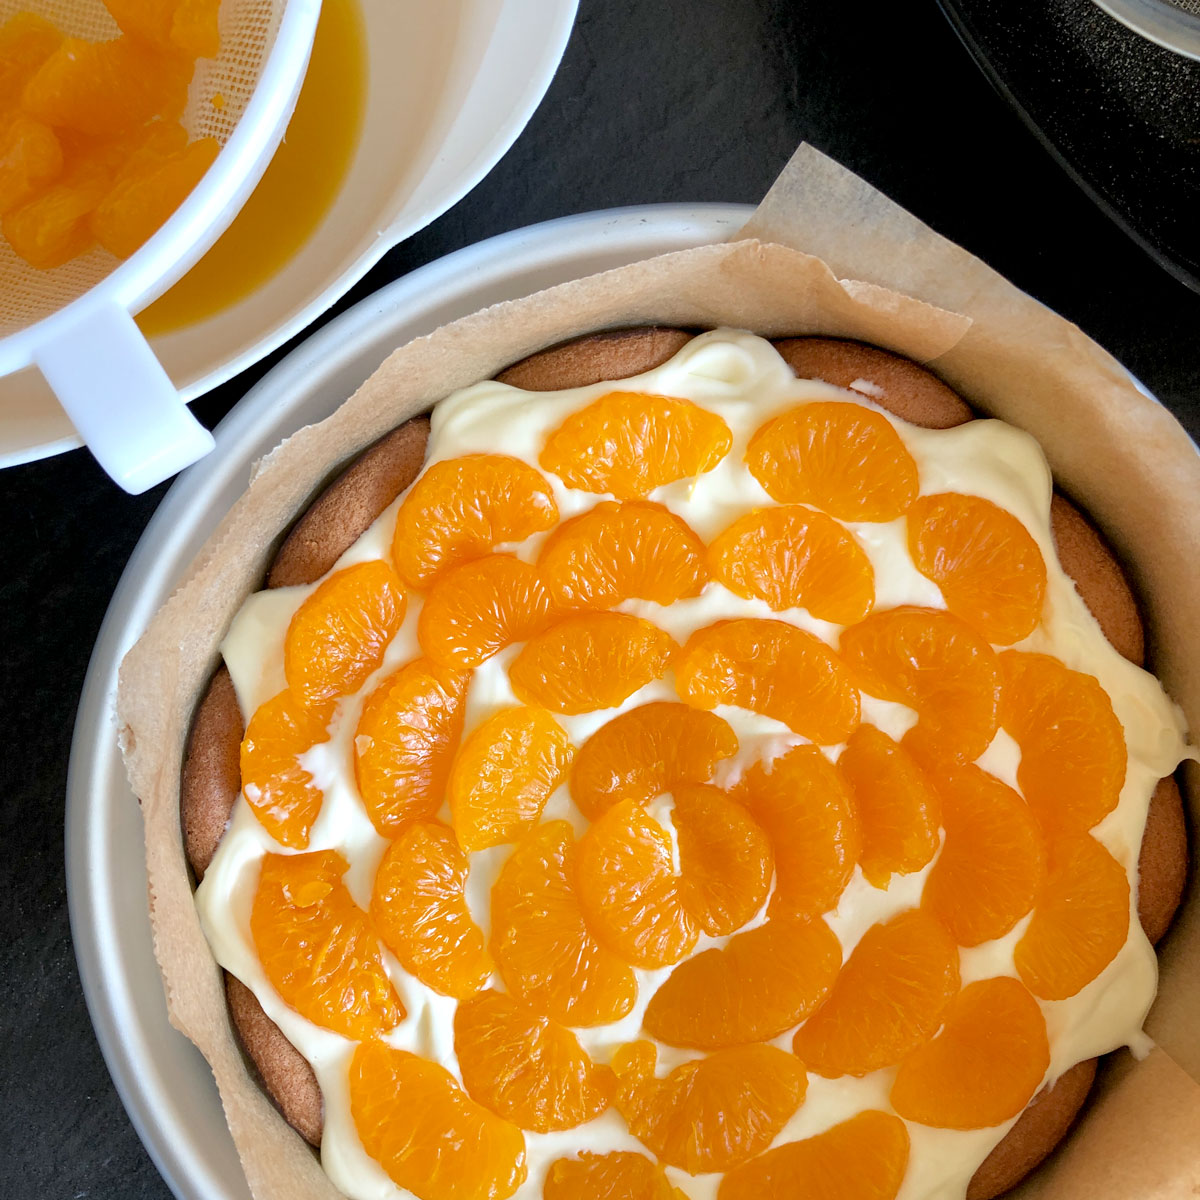 Tinned mandarins placed over whipped cream in a cake tin.